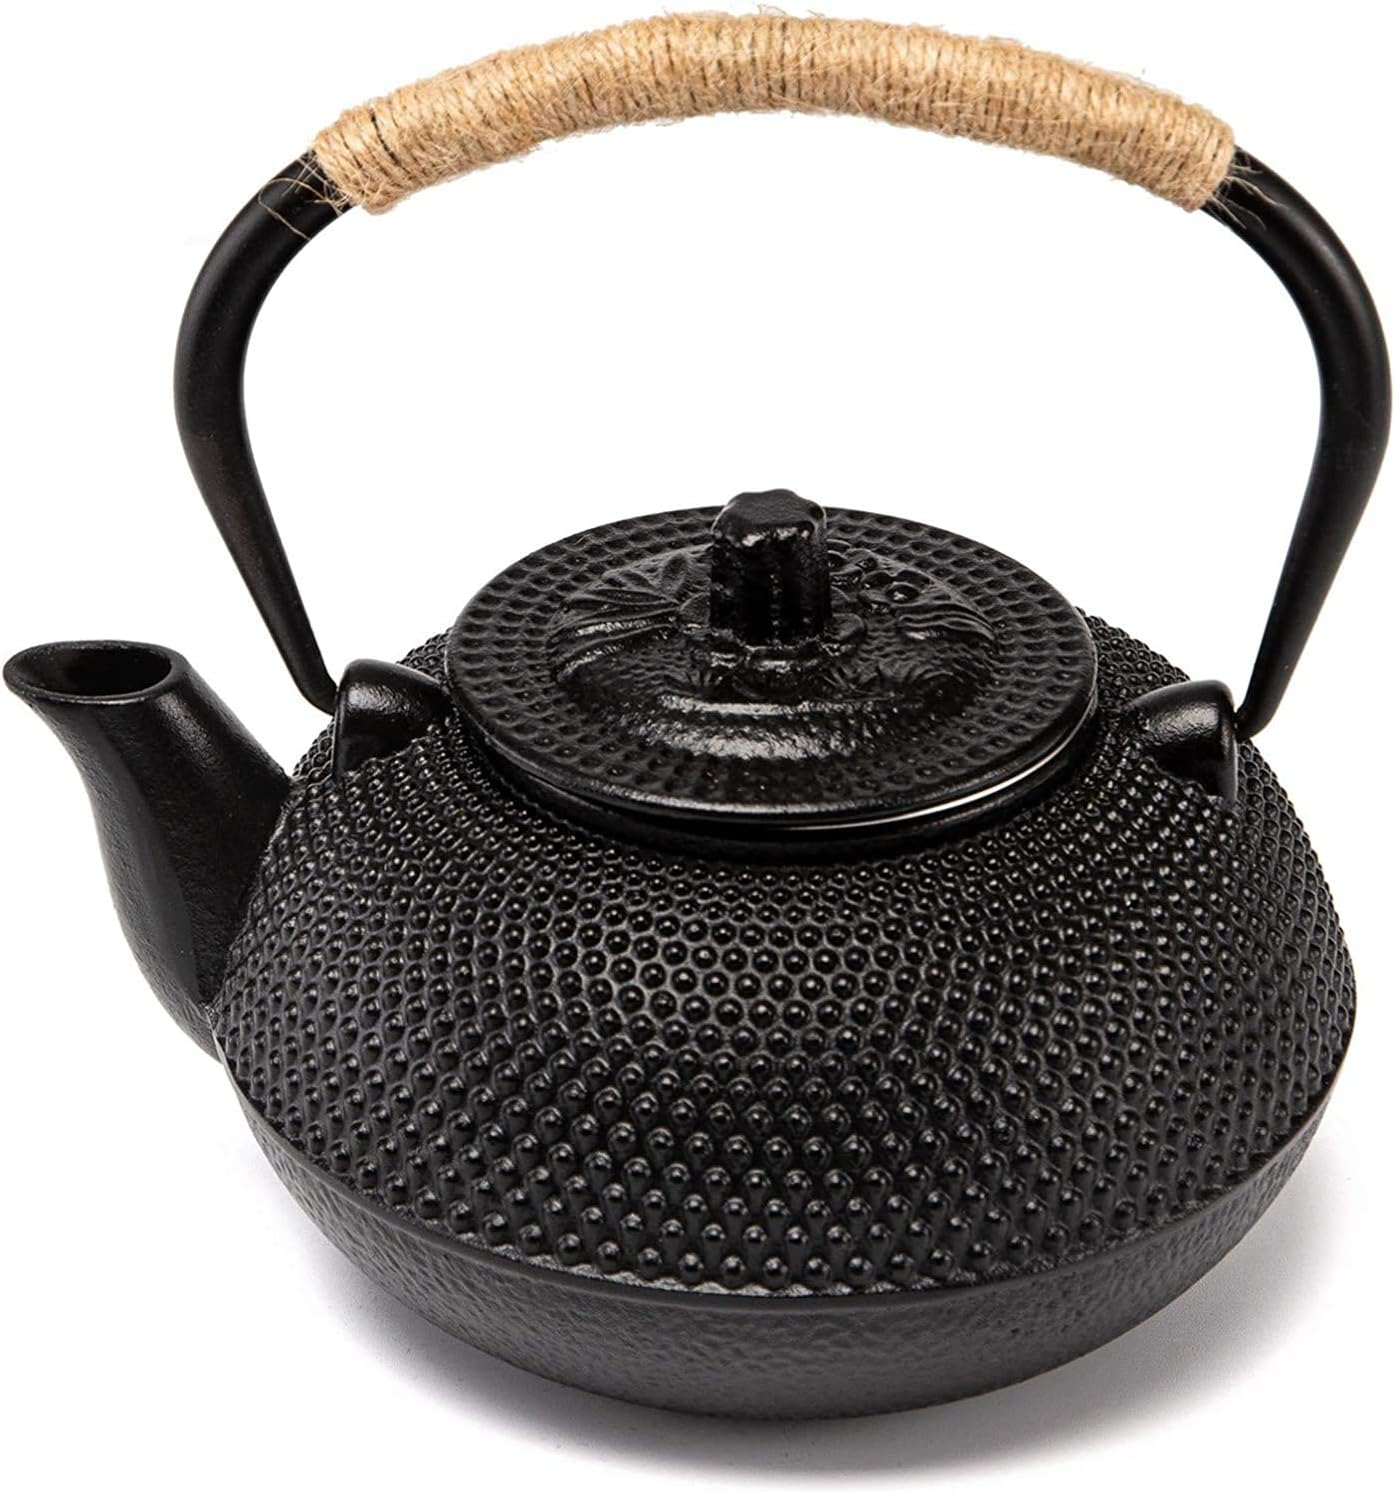 900ml Cast Iron Teapot Hobnail Japanese Style Tea Pot Kettle with Infuser Filter 